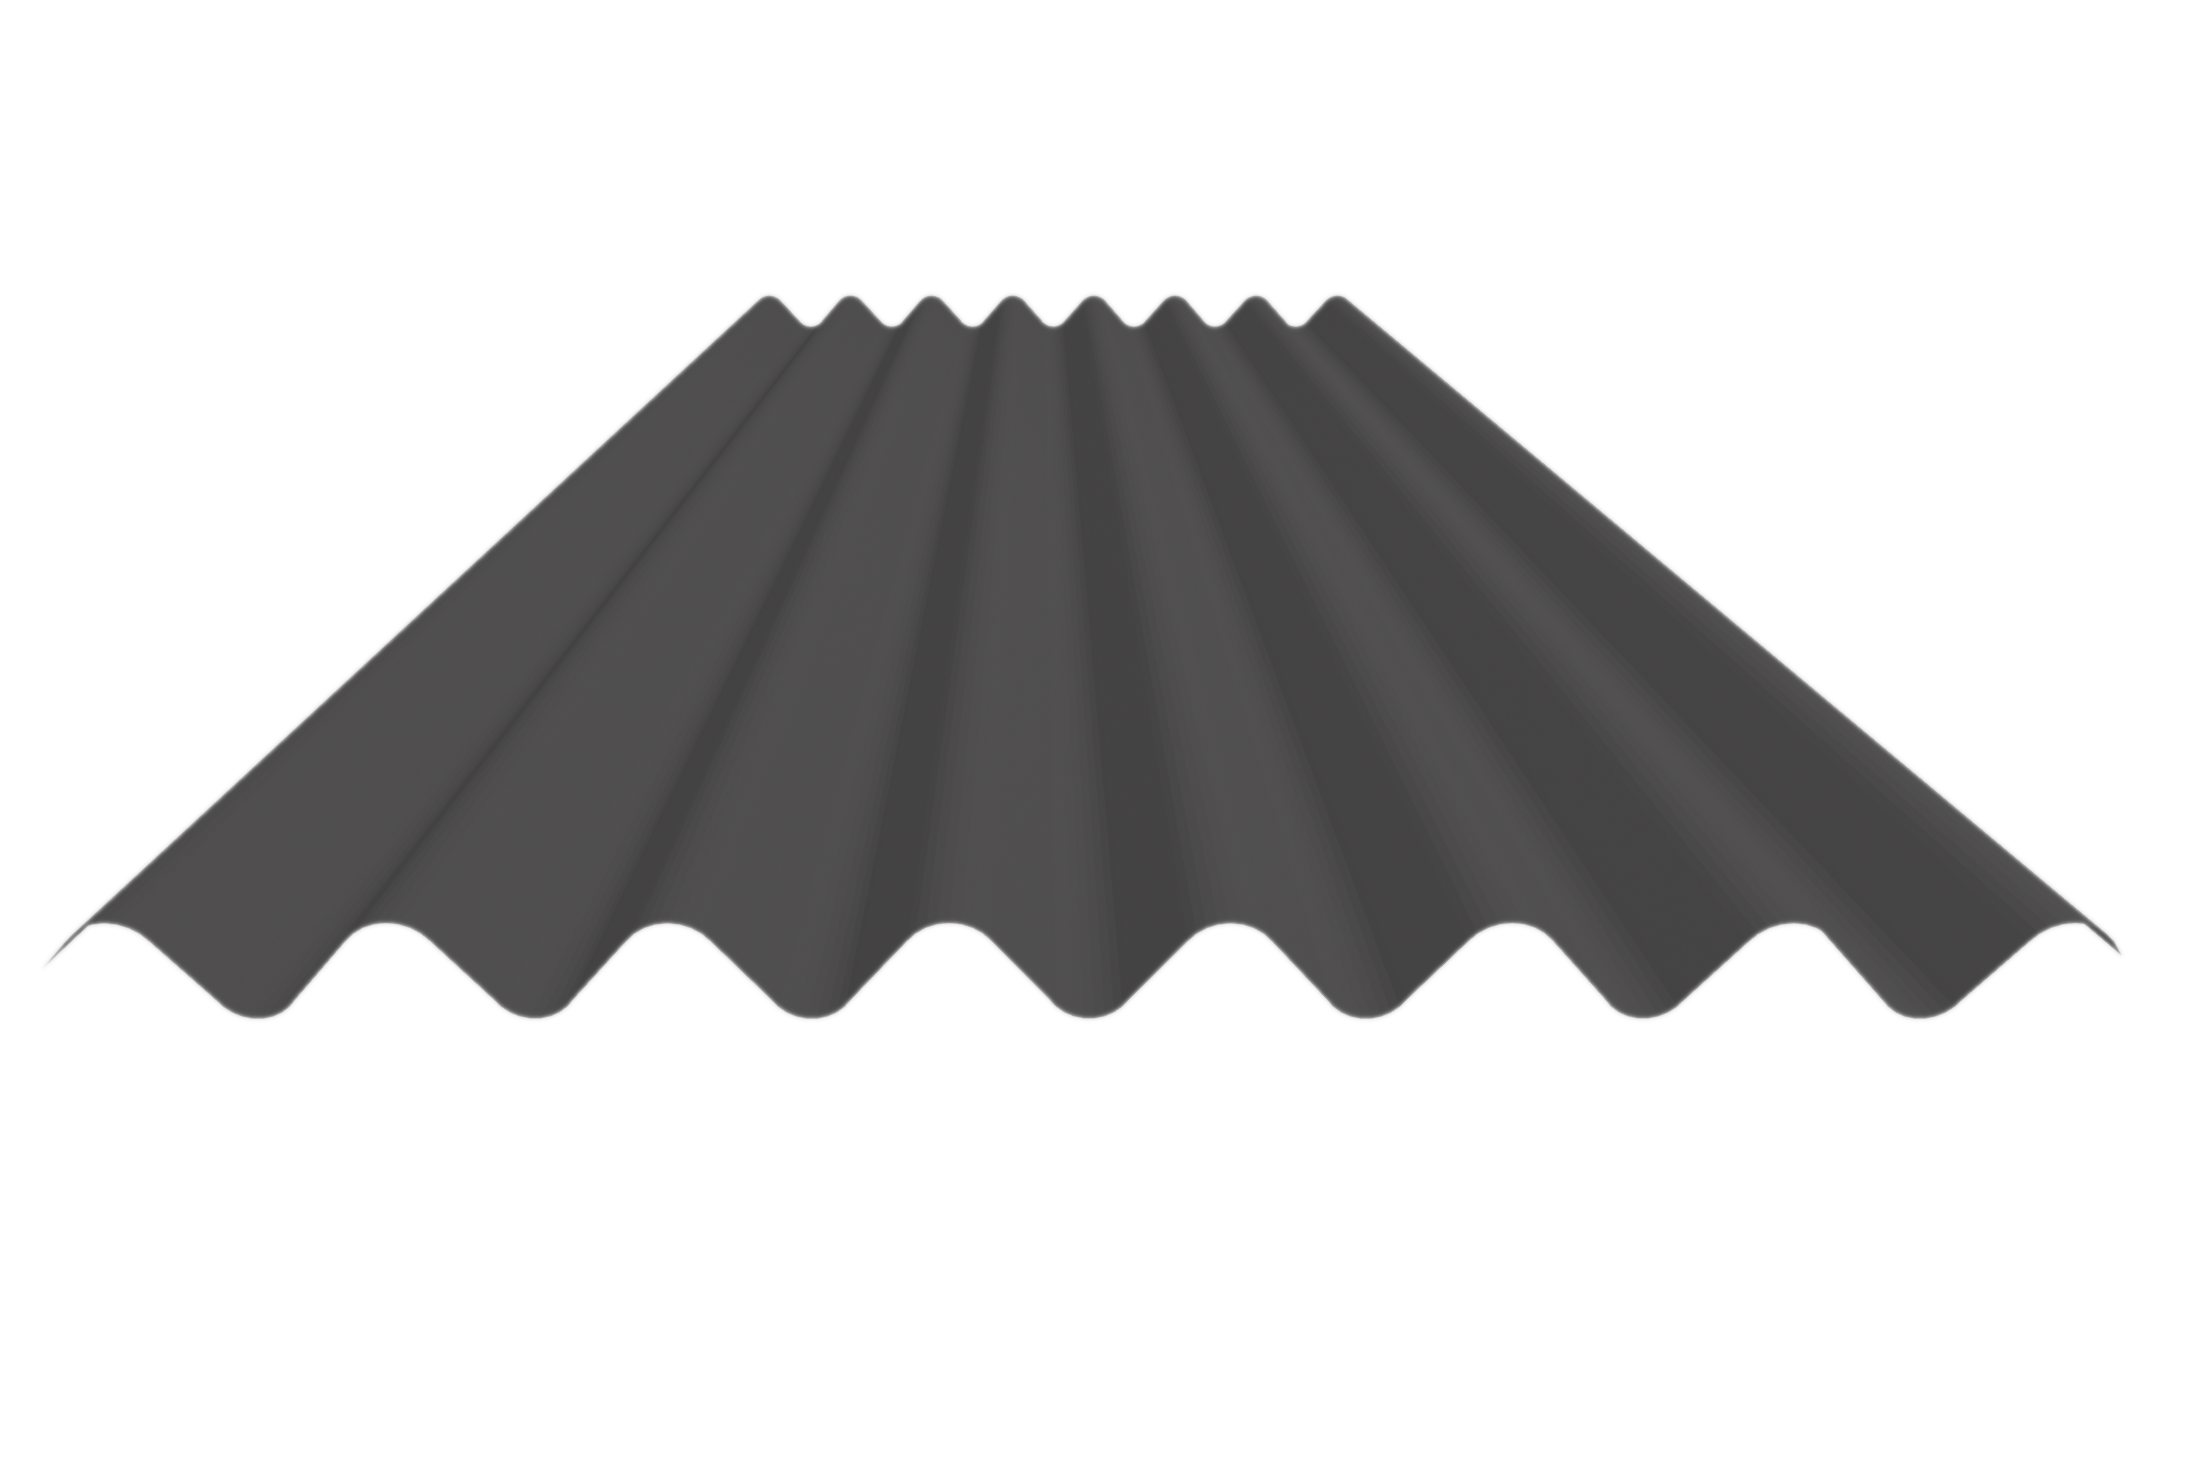 Big 6 Profile Roofing Sheets 10ft Length four spare sheets 